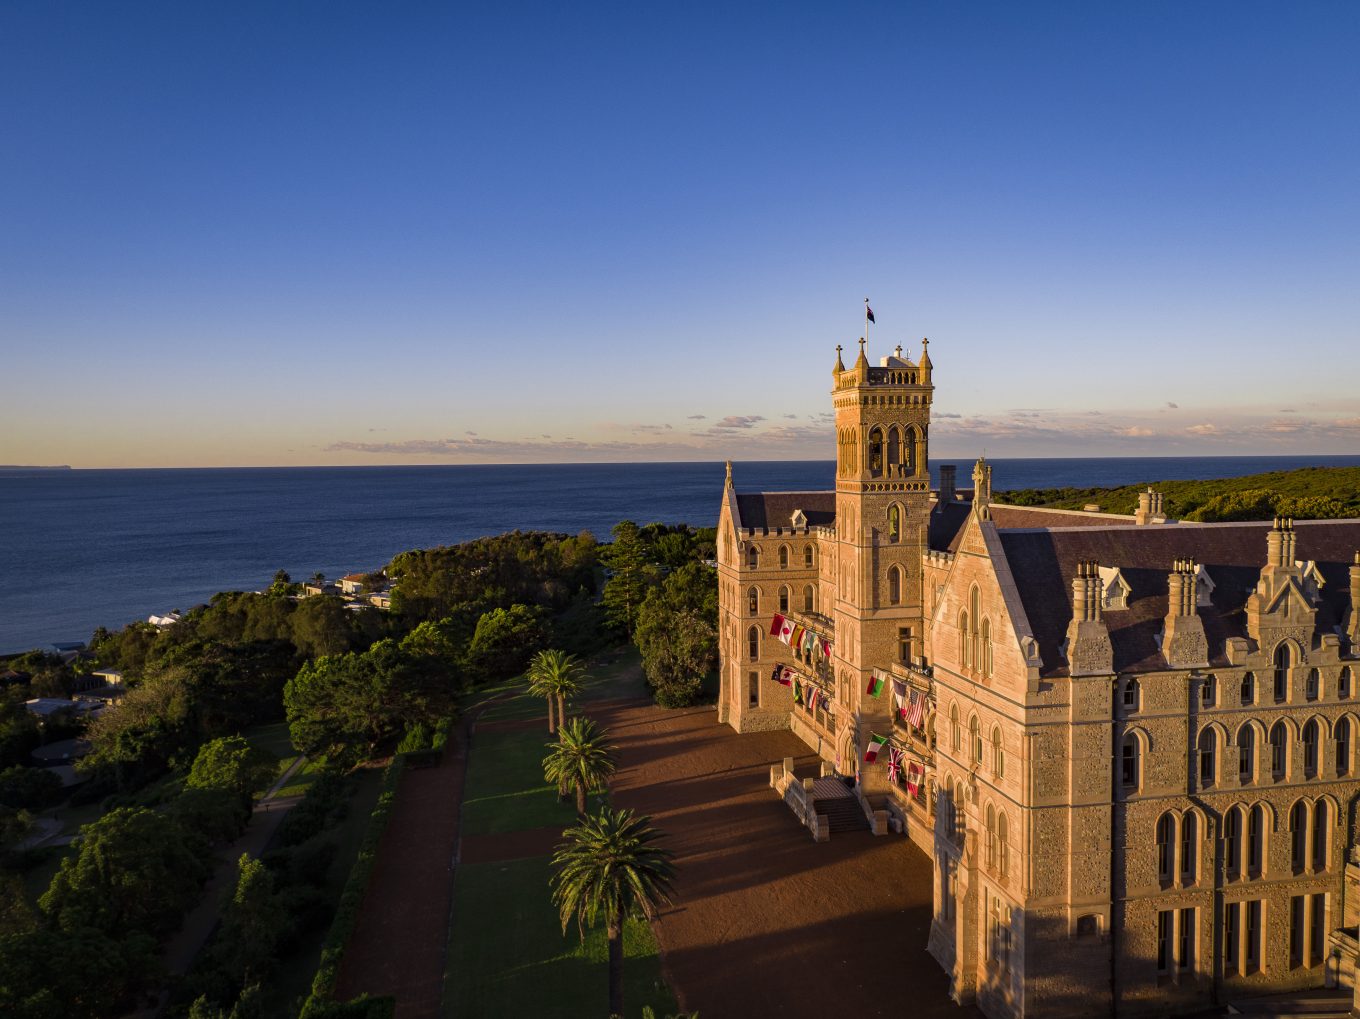 International College of Management, Sydney; aerial shot of the Manly Beach campus and castle